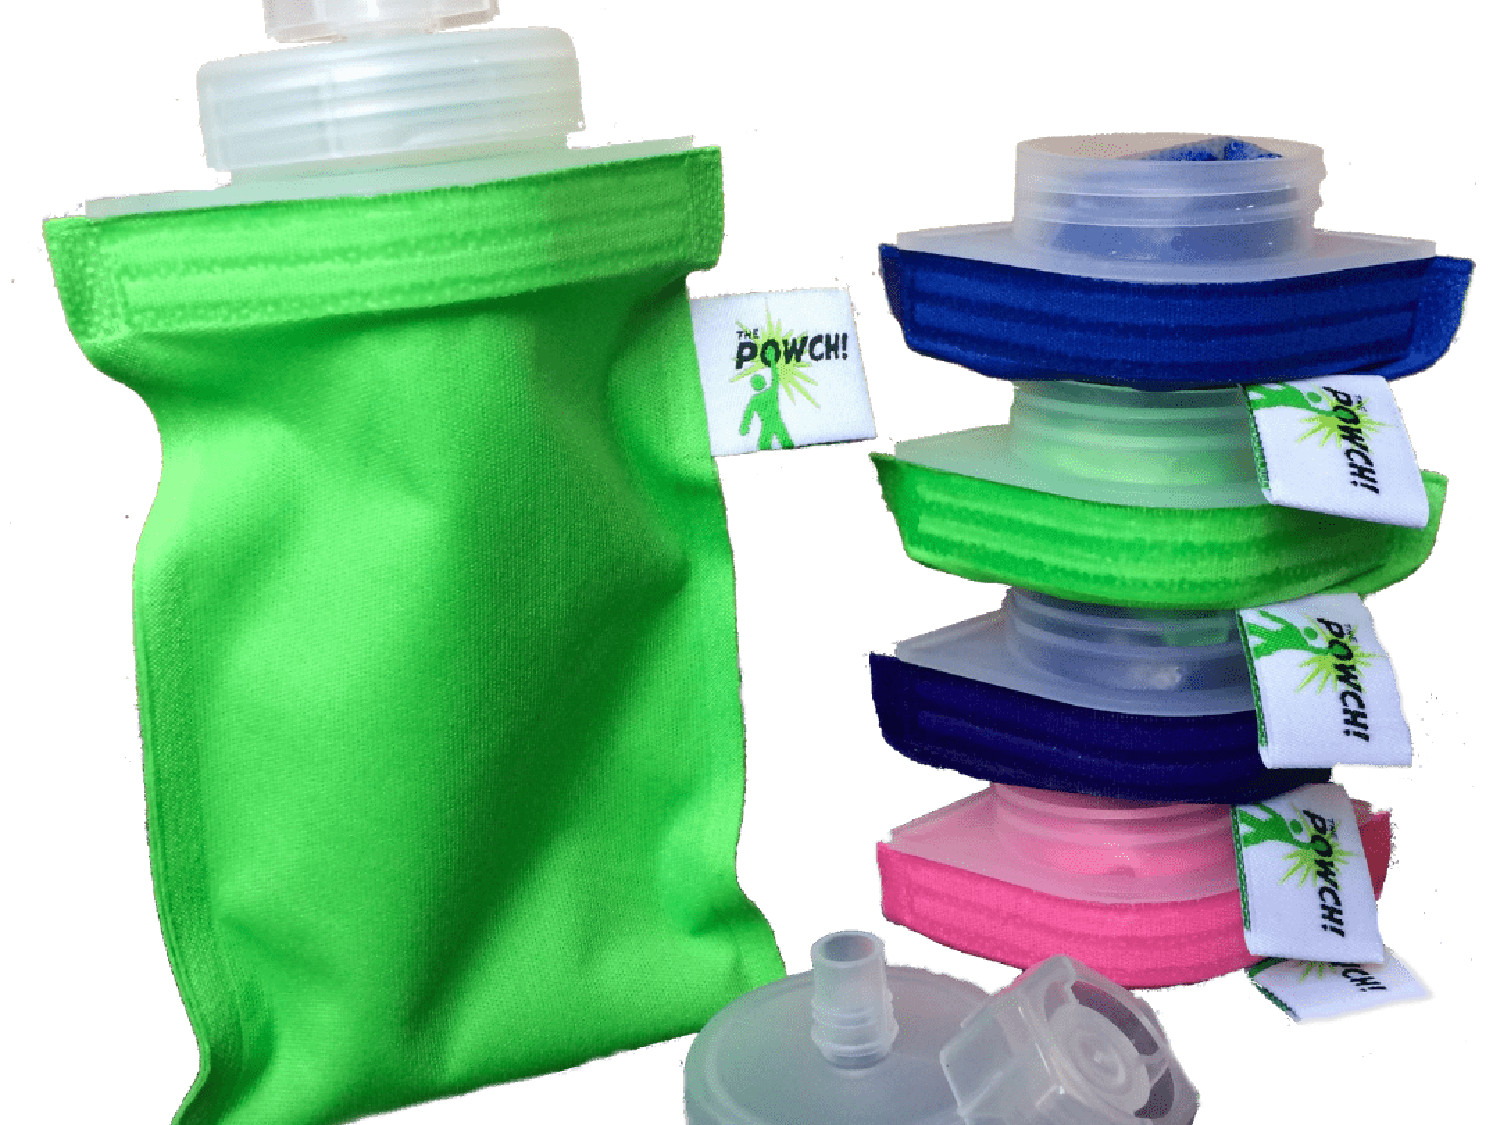 THE POWCH! Reusable drink, food pouch, bottle, container